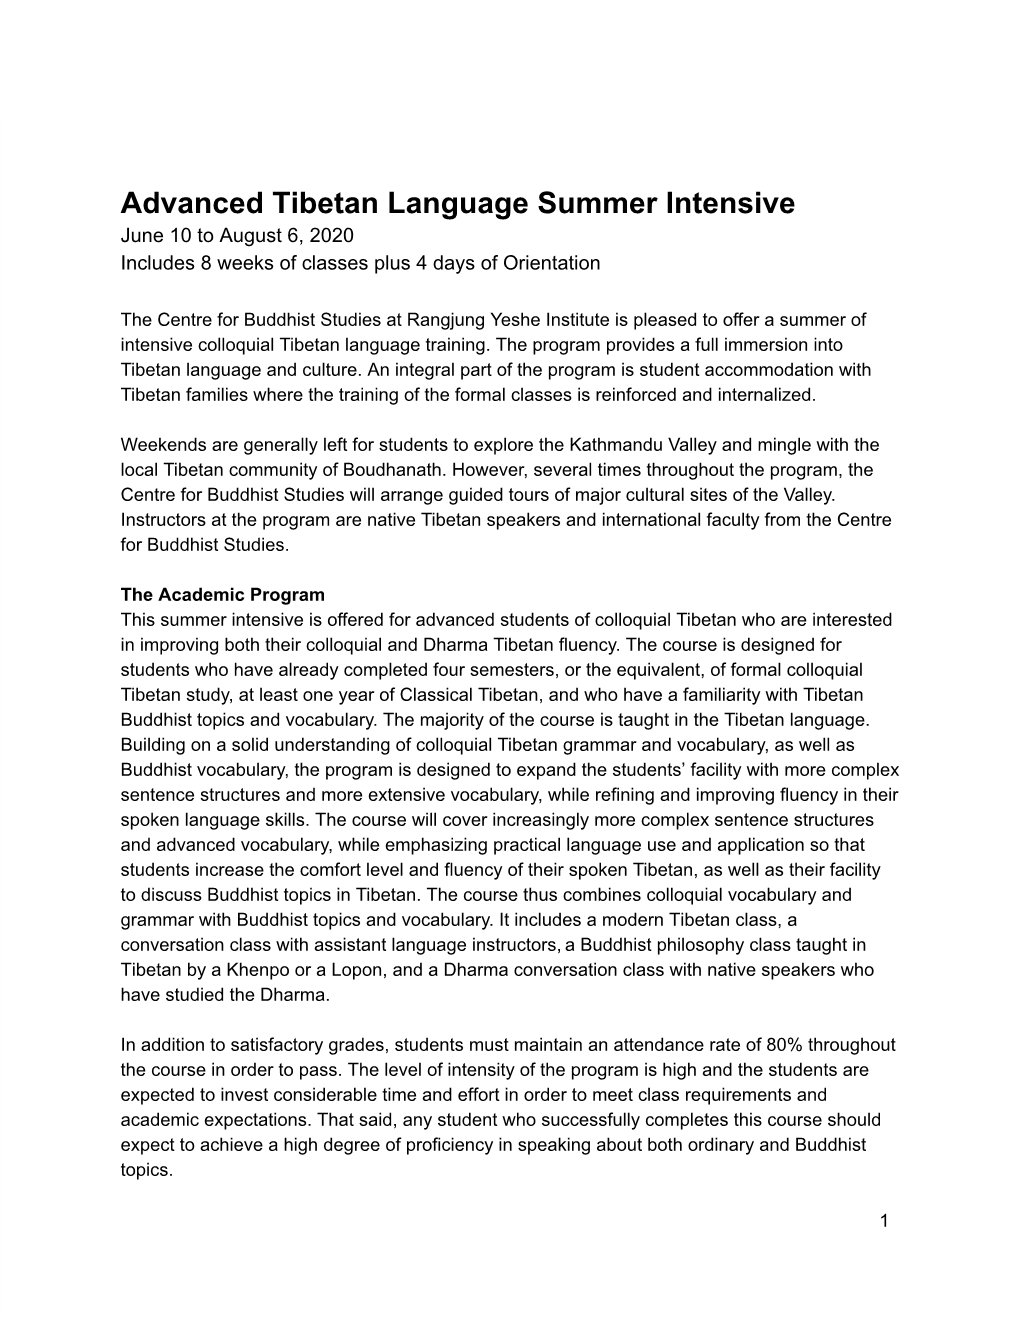 Advanced Tibetan Language Summer Intensive June 10 to August 6, 2020 Includes 8 Weeks of Classes Plus 4 Days of Orientation